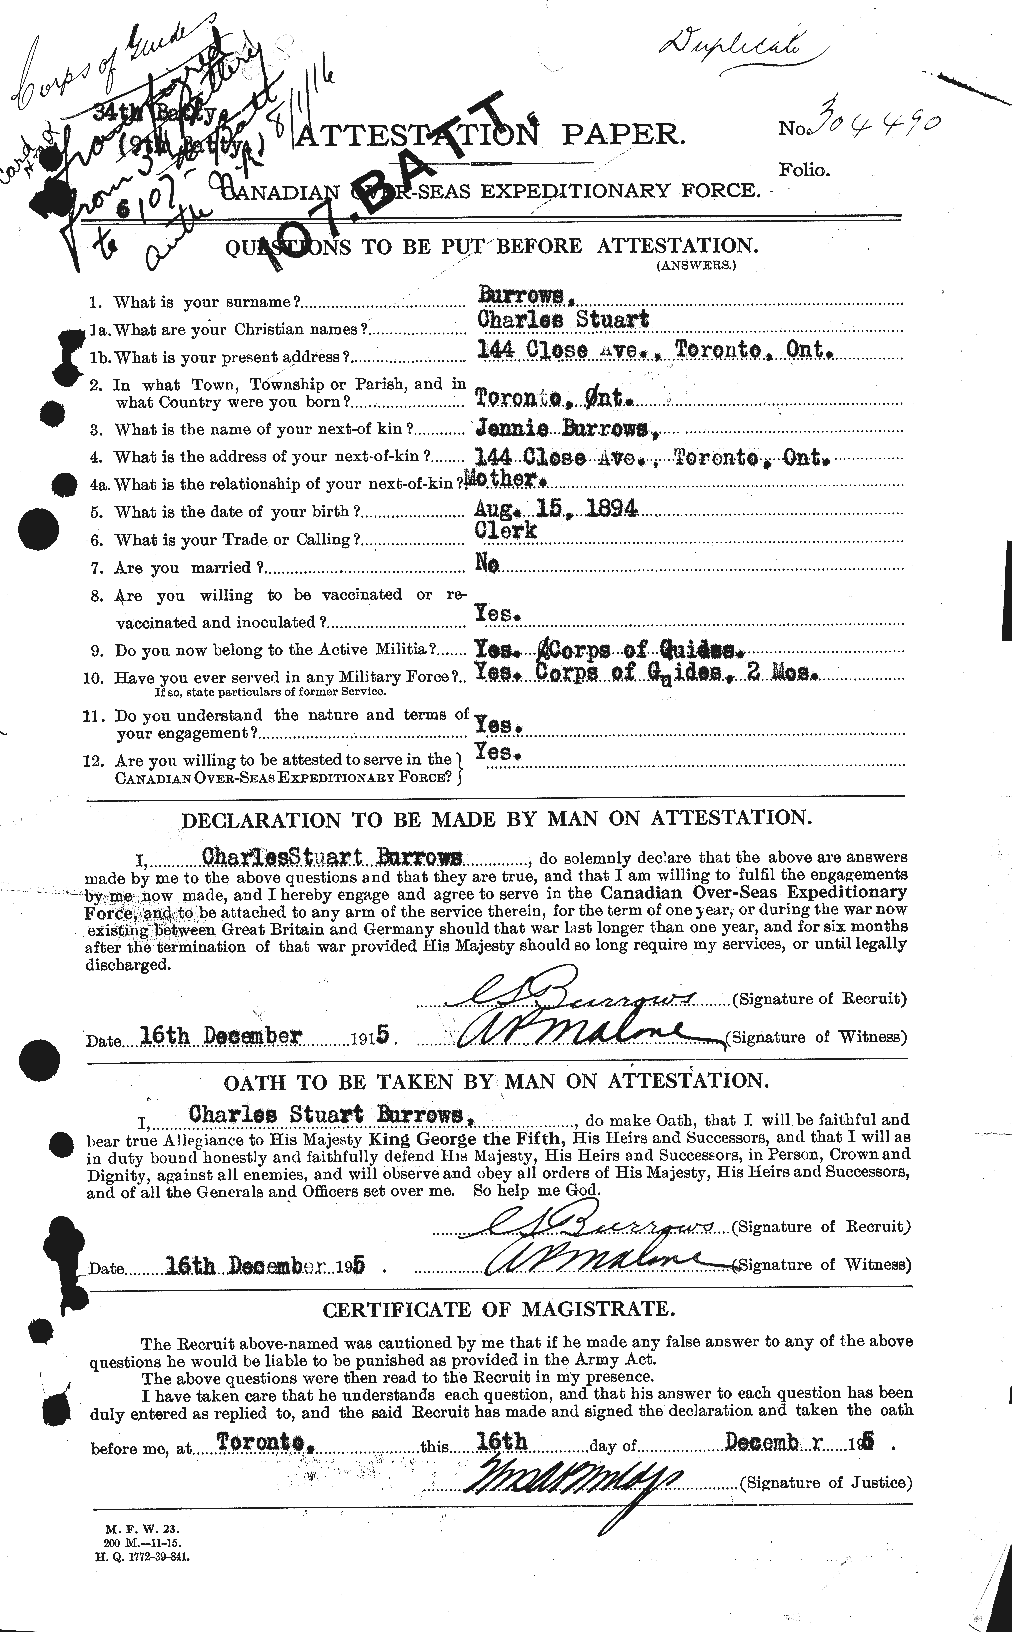 Personnel Records of the First World War - CEF 274789a